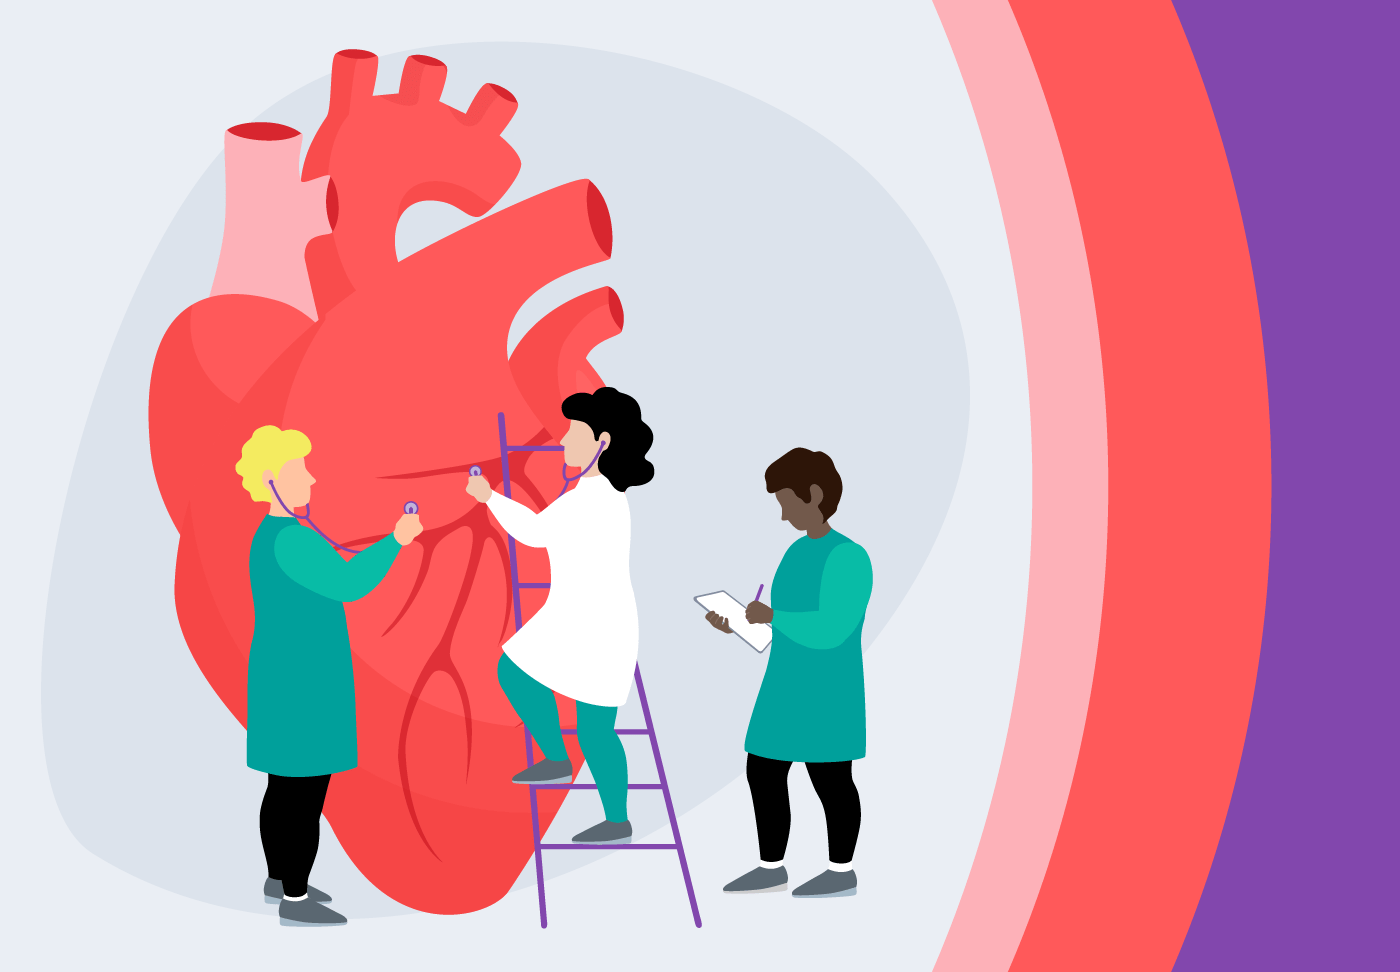 Illustration of cardiovascular experts repairing a heart together.